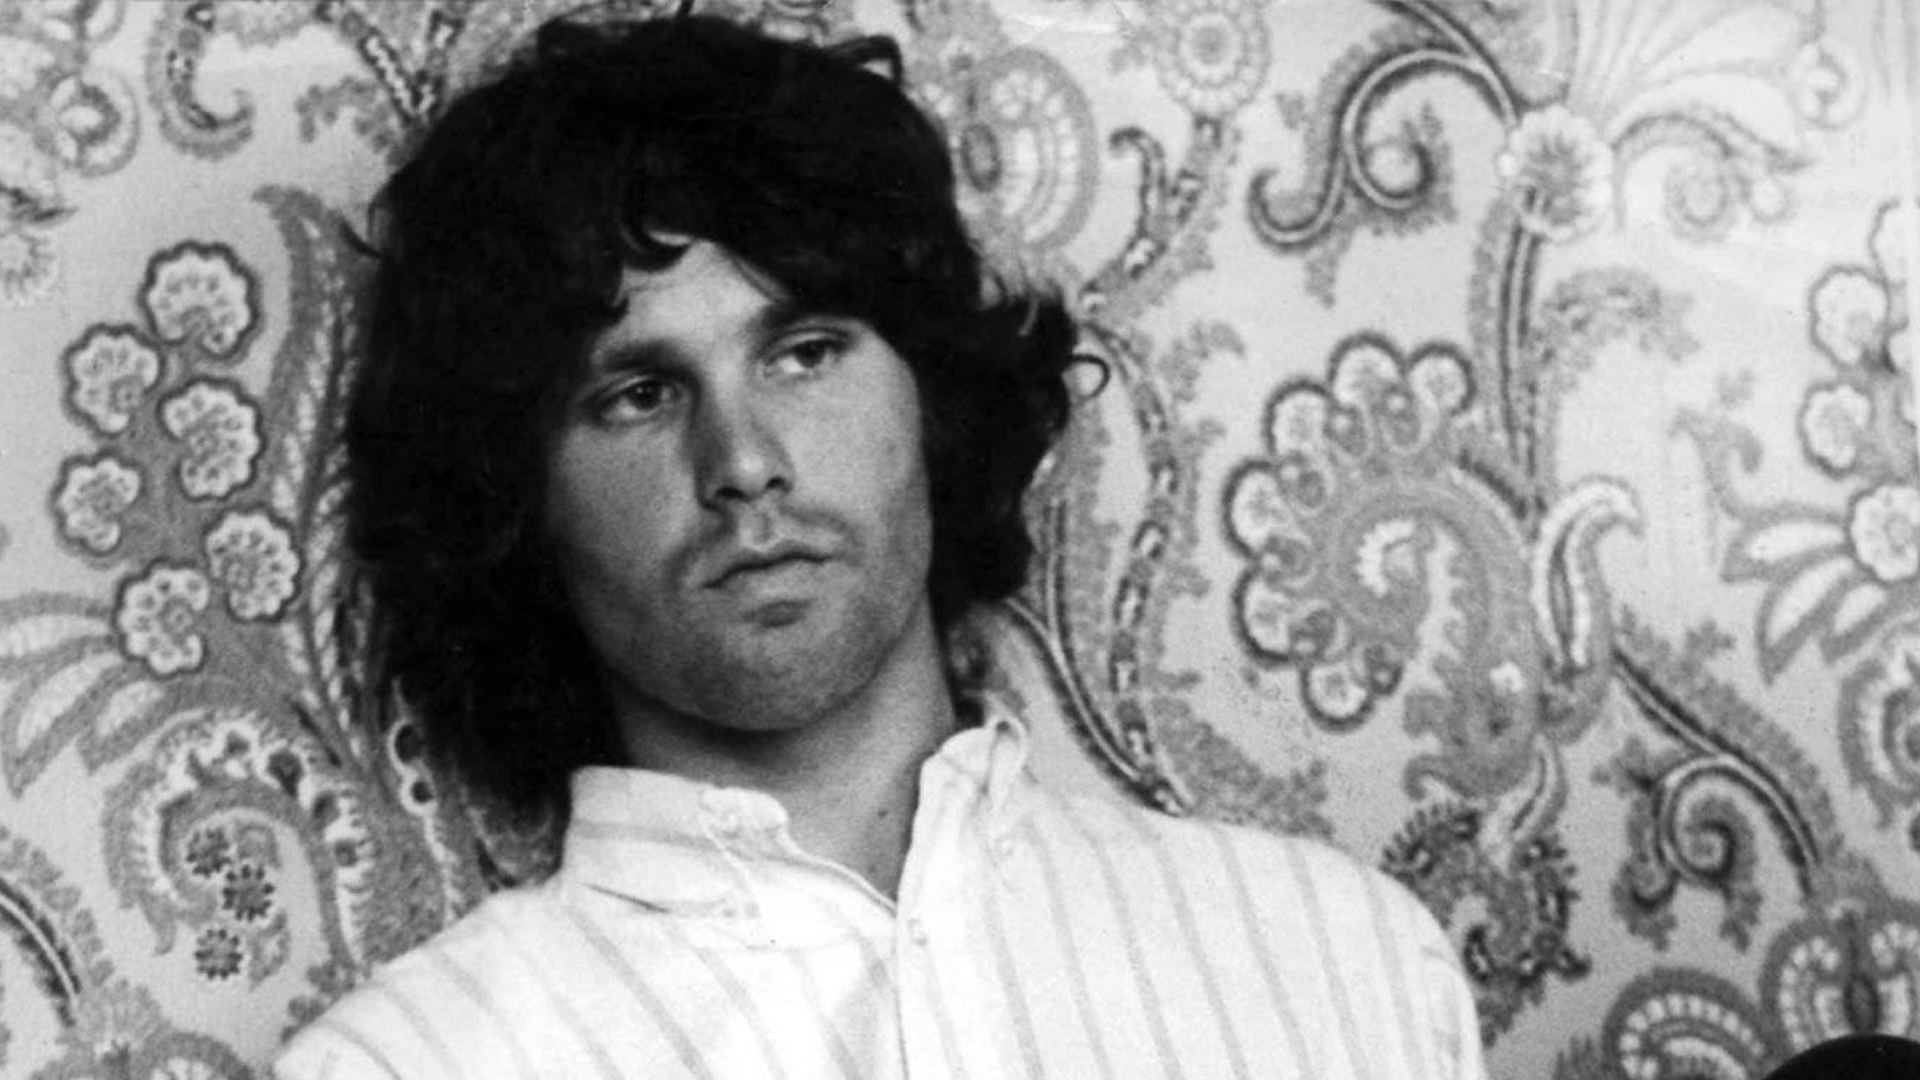 Jim Morrison Wallpaper Full HD Pictures To Pin